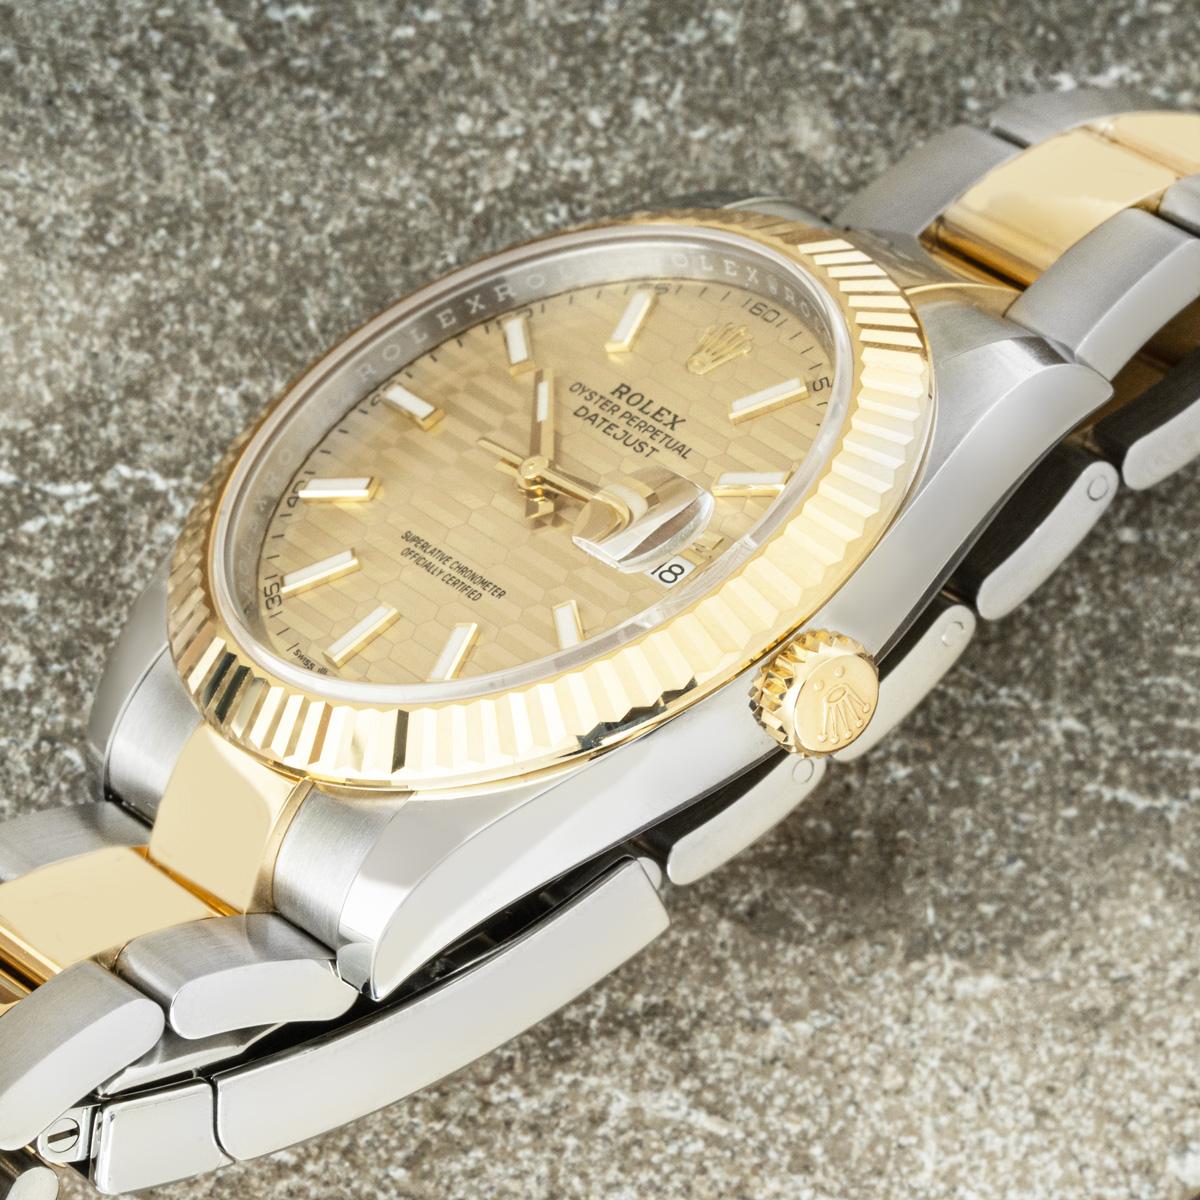 A steel and gold men's Datejust 41mm by Rolex. Featuring a champagne fluted motif dial with a yellow gold fluted bezel. Fitted with a sapphire crystal and a self-winding automatic movement. The watch is also equipped with a steel and gold Oyster